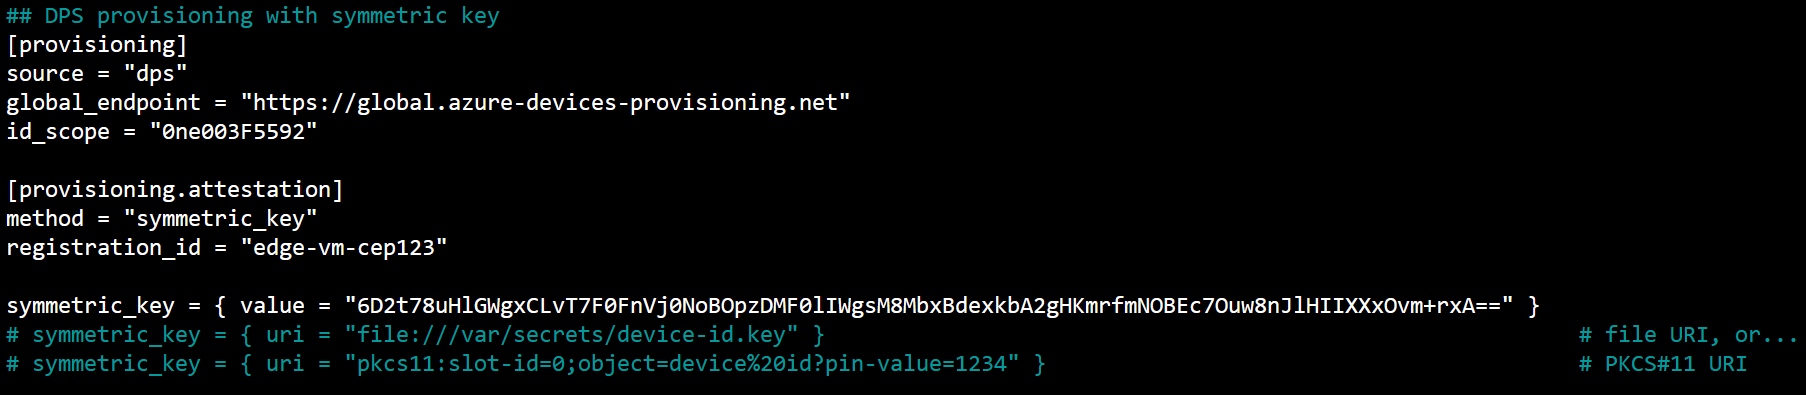 The IoT Edge configuration file is open in nano with the variables mentioned above replaced accordingly.